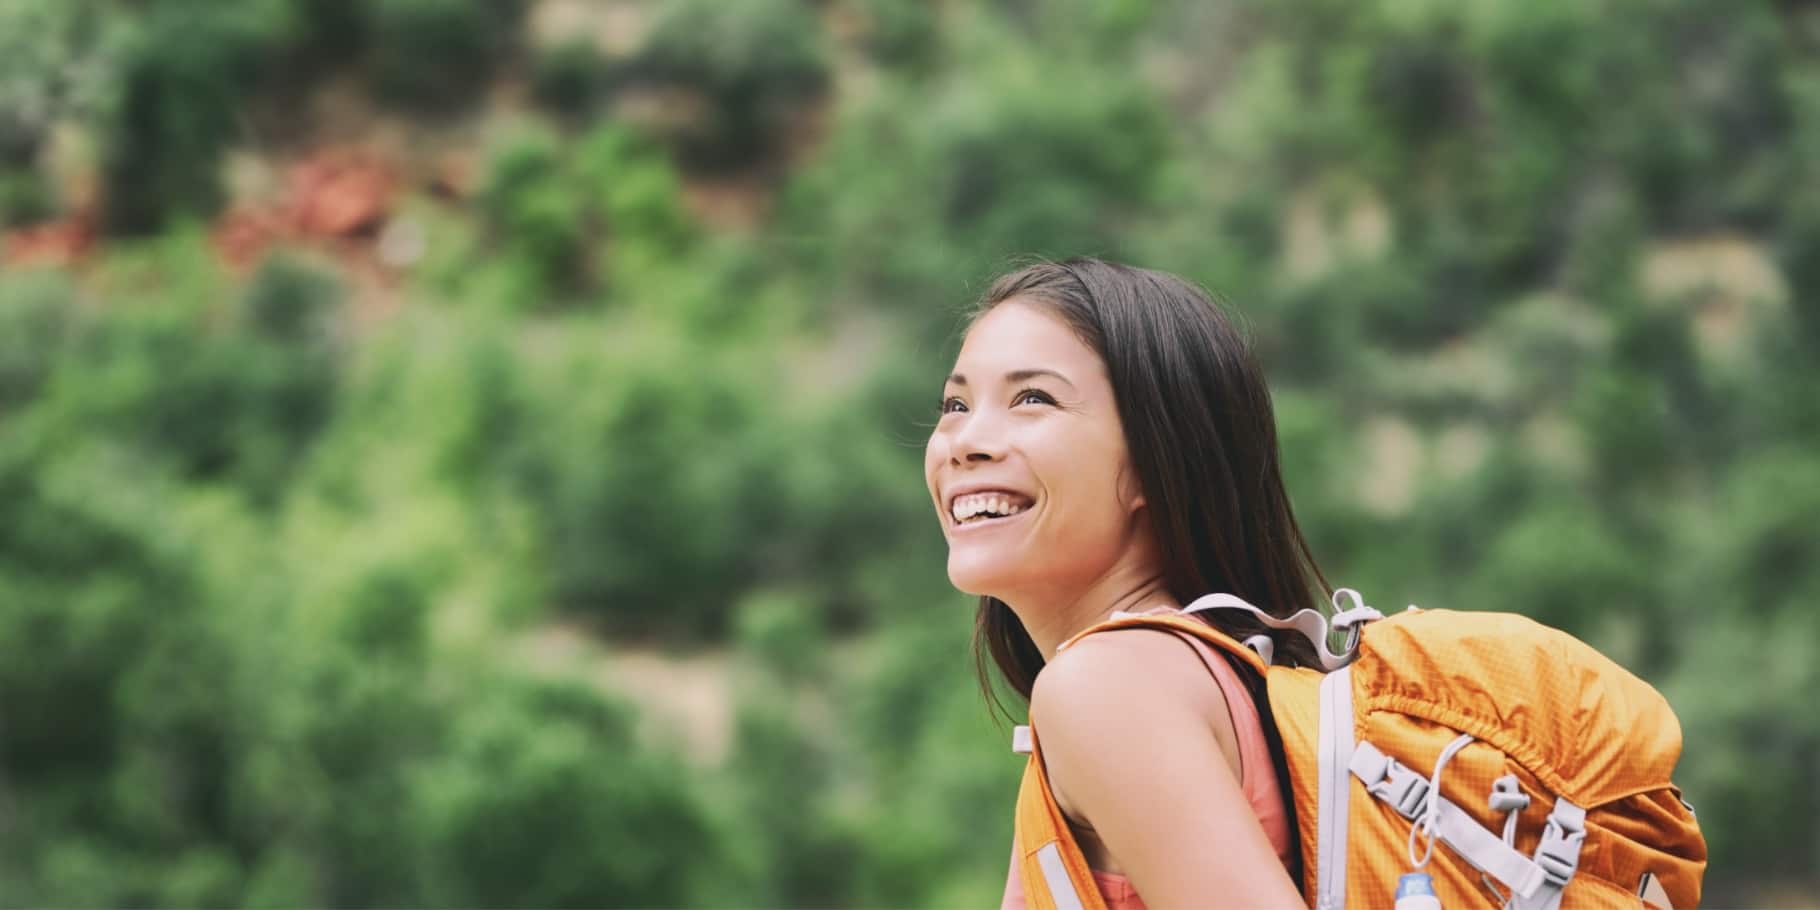 A young smiling woman hiking.